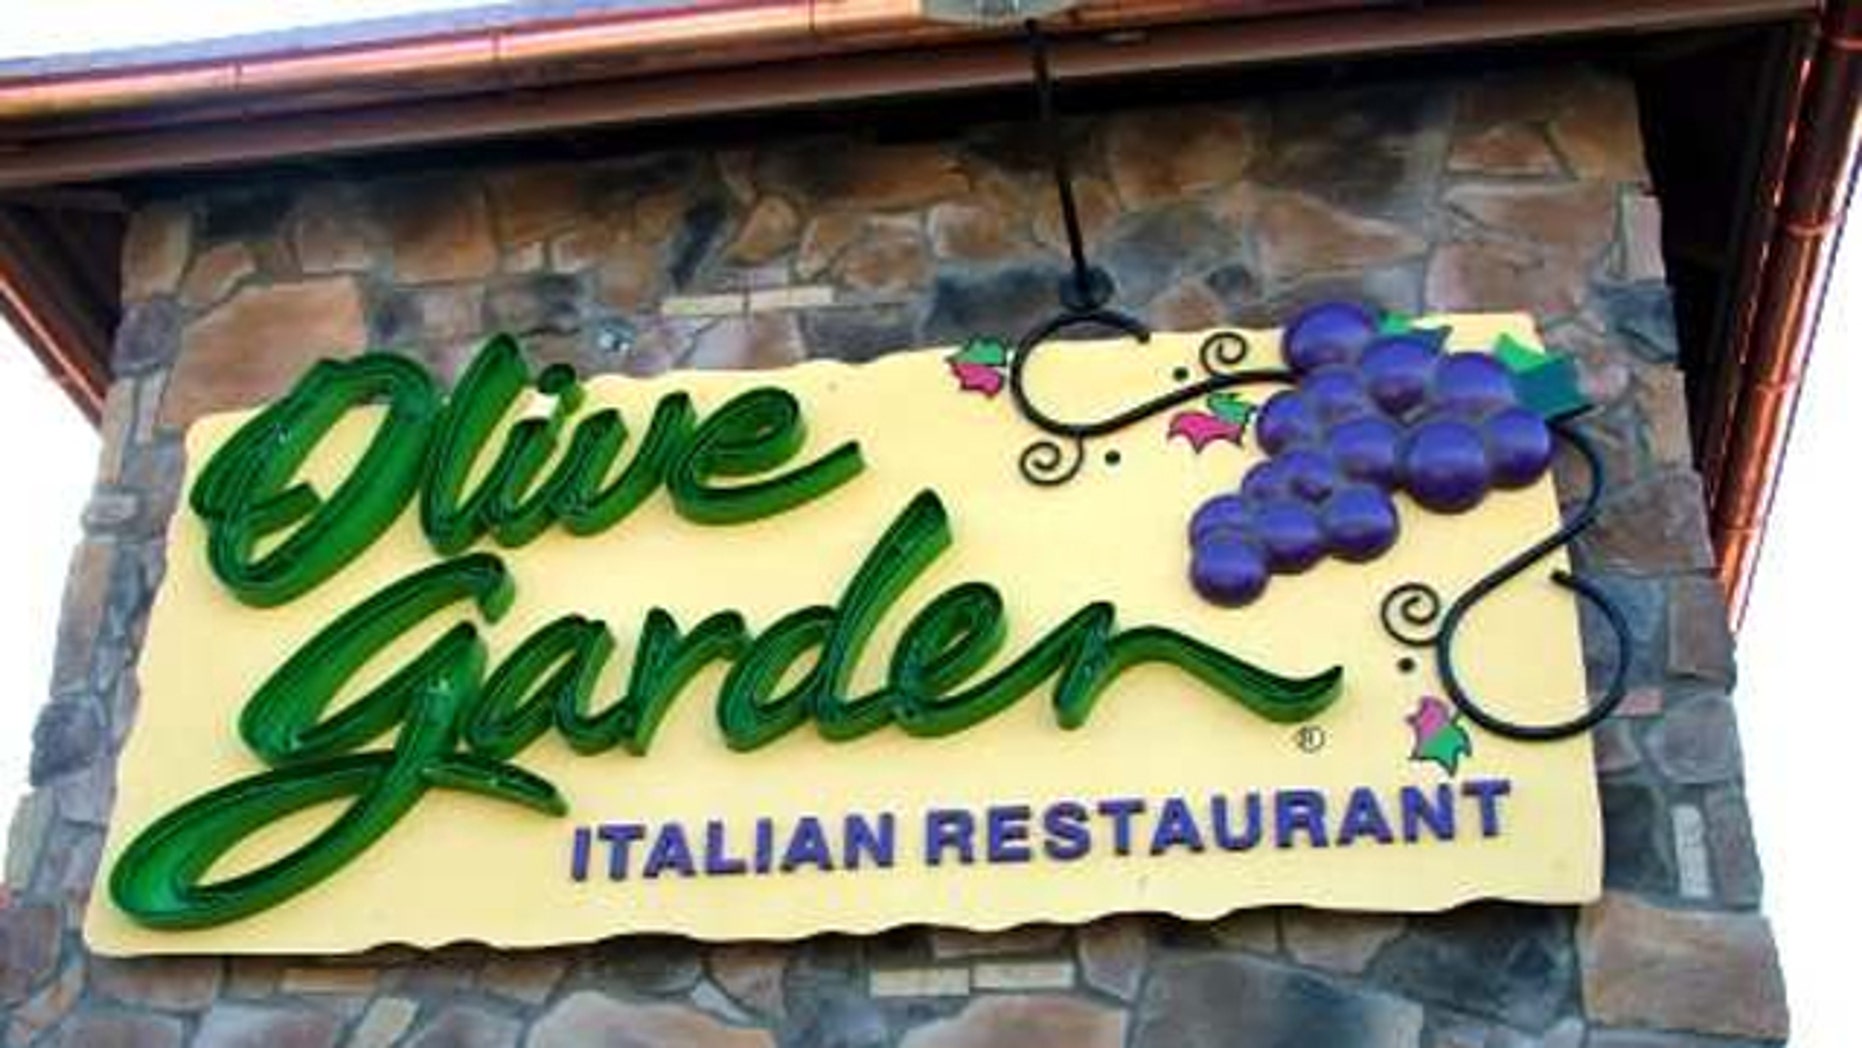 Investor Olive Garden Gives Out Too Many Breadsticks Fox News